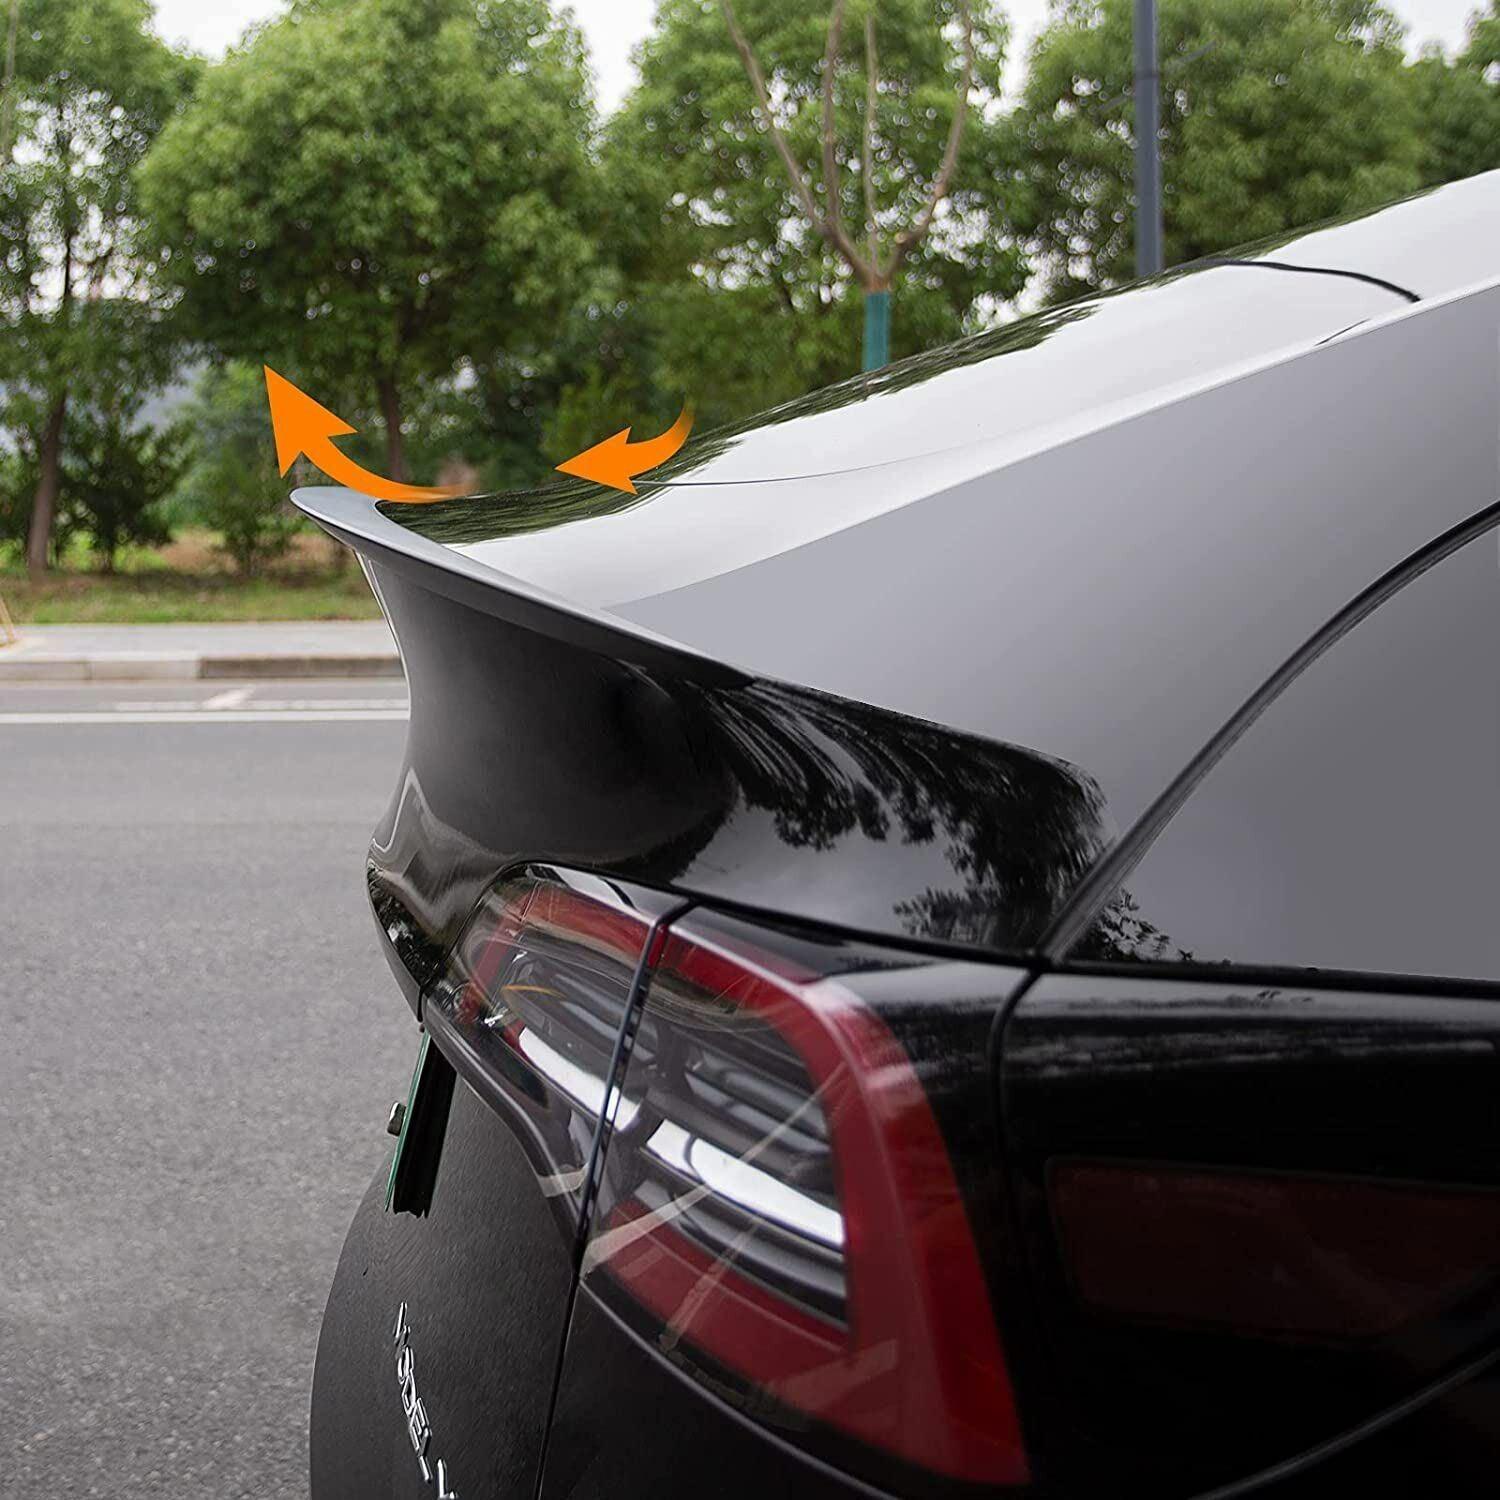 Performance Spoiler for Model Y - TESLOVERY